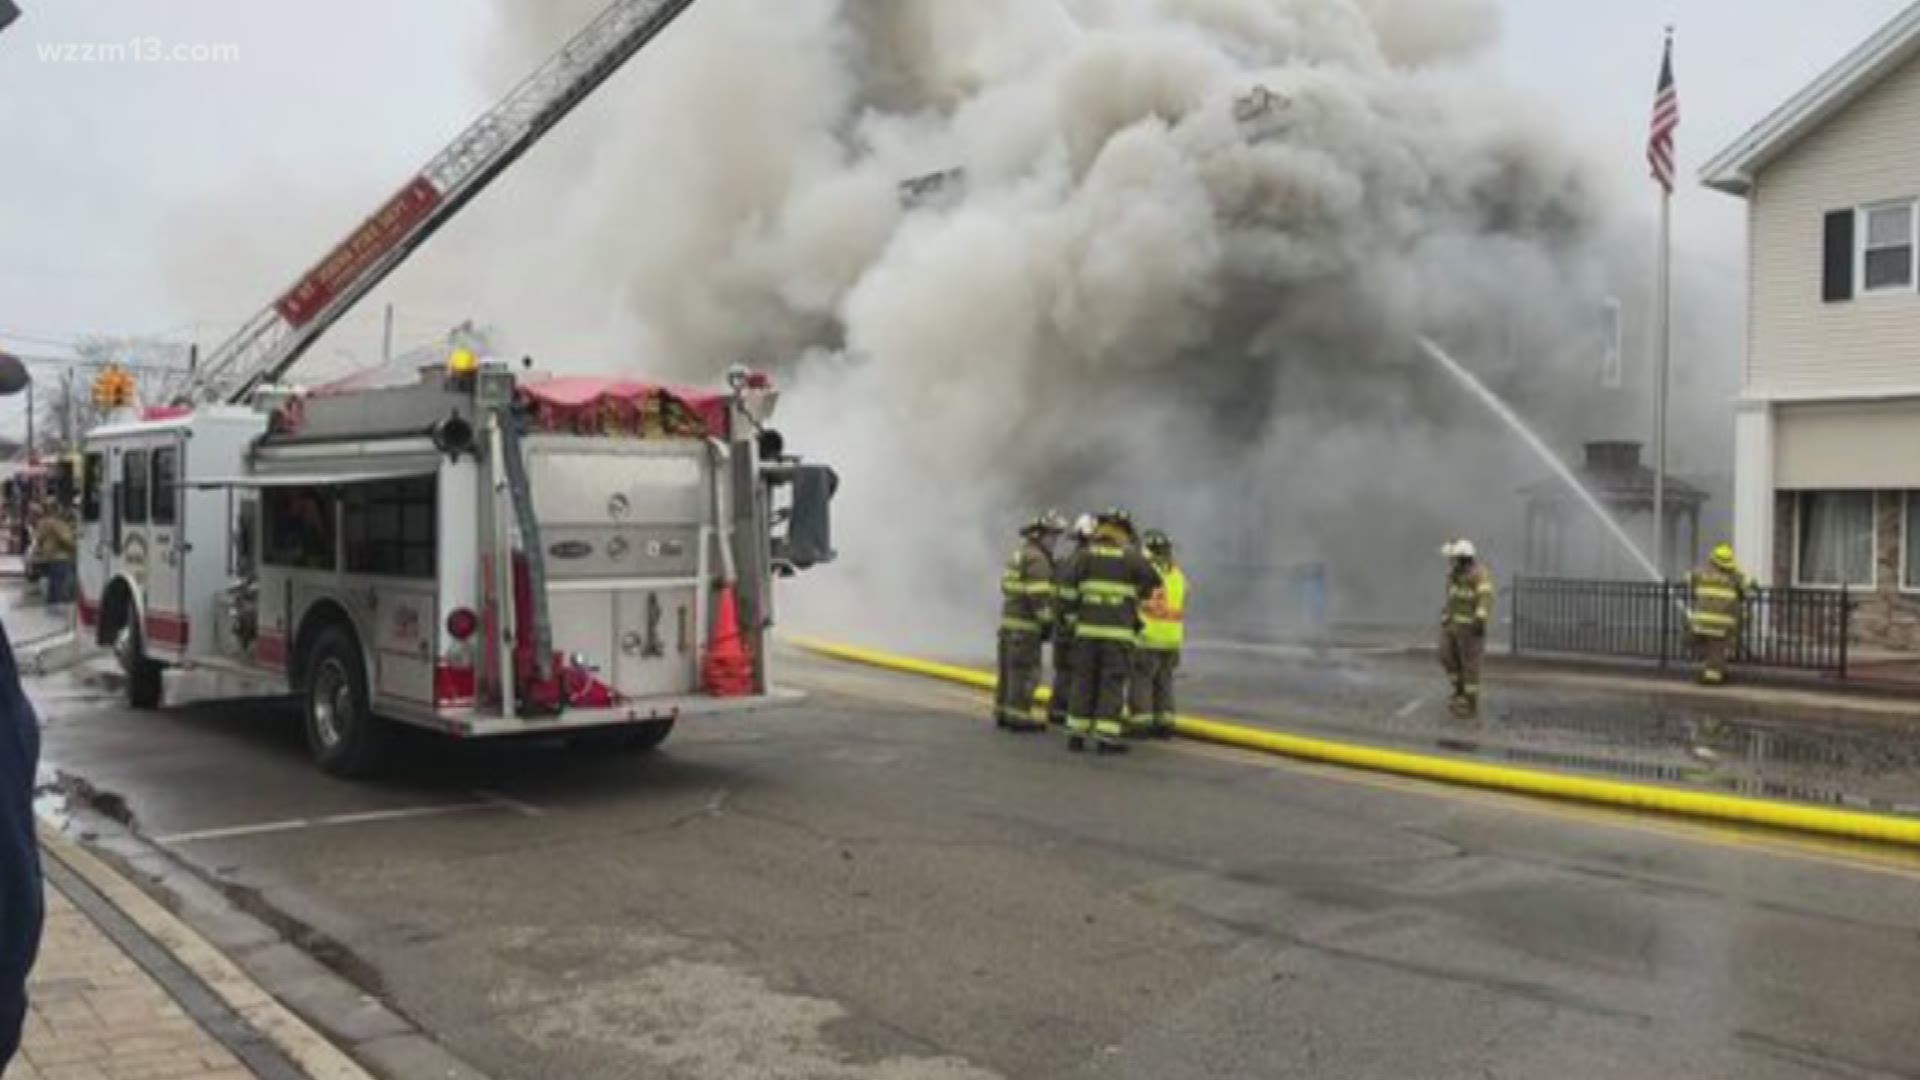 Downtown Fowler fire destroys two businesses